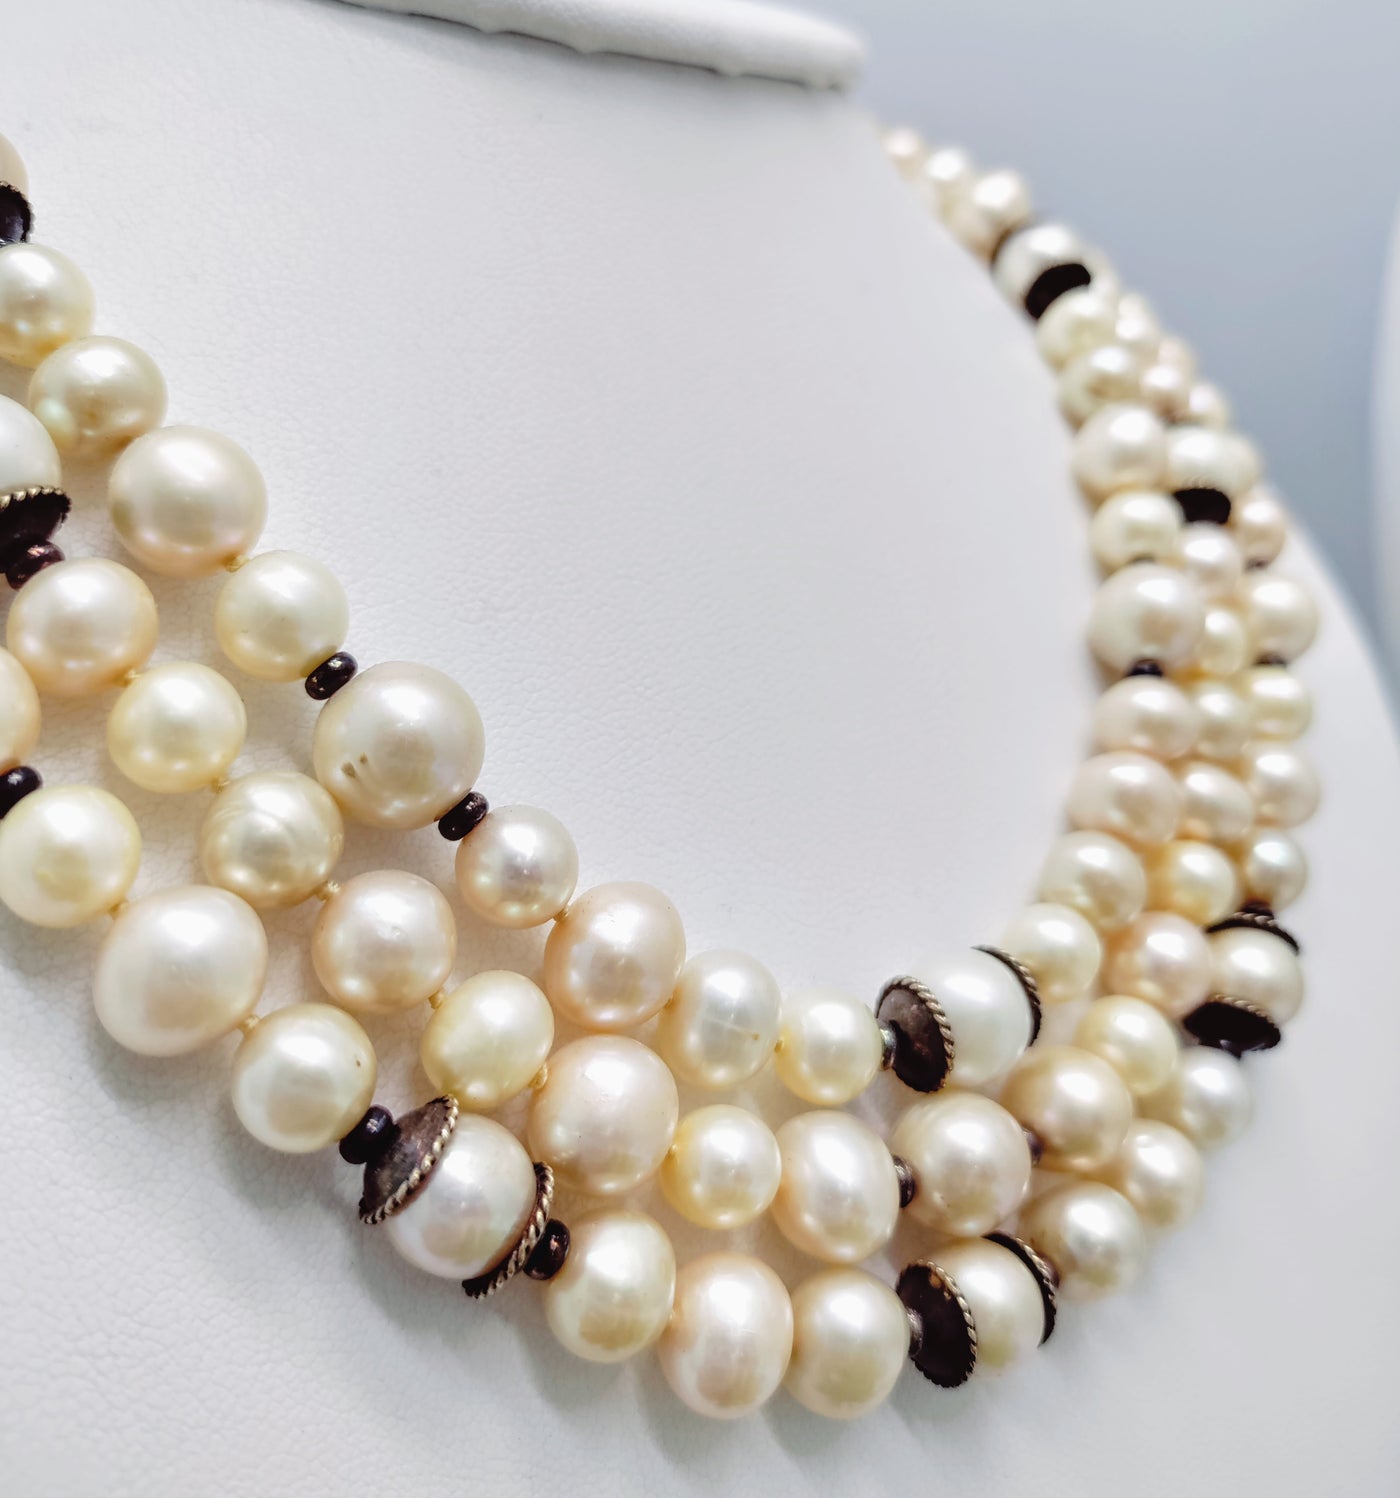 "Sugar and Spice" Necklace - Pearls, Oxidized Gold-washed Sterling Accents